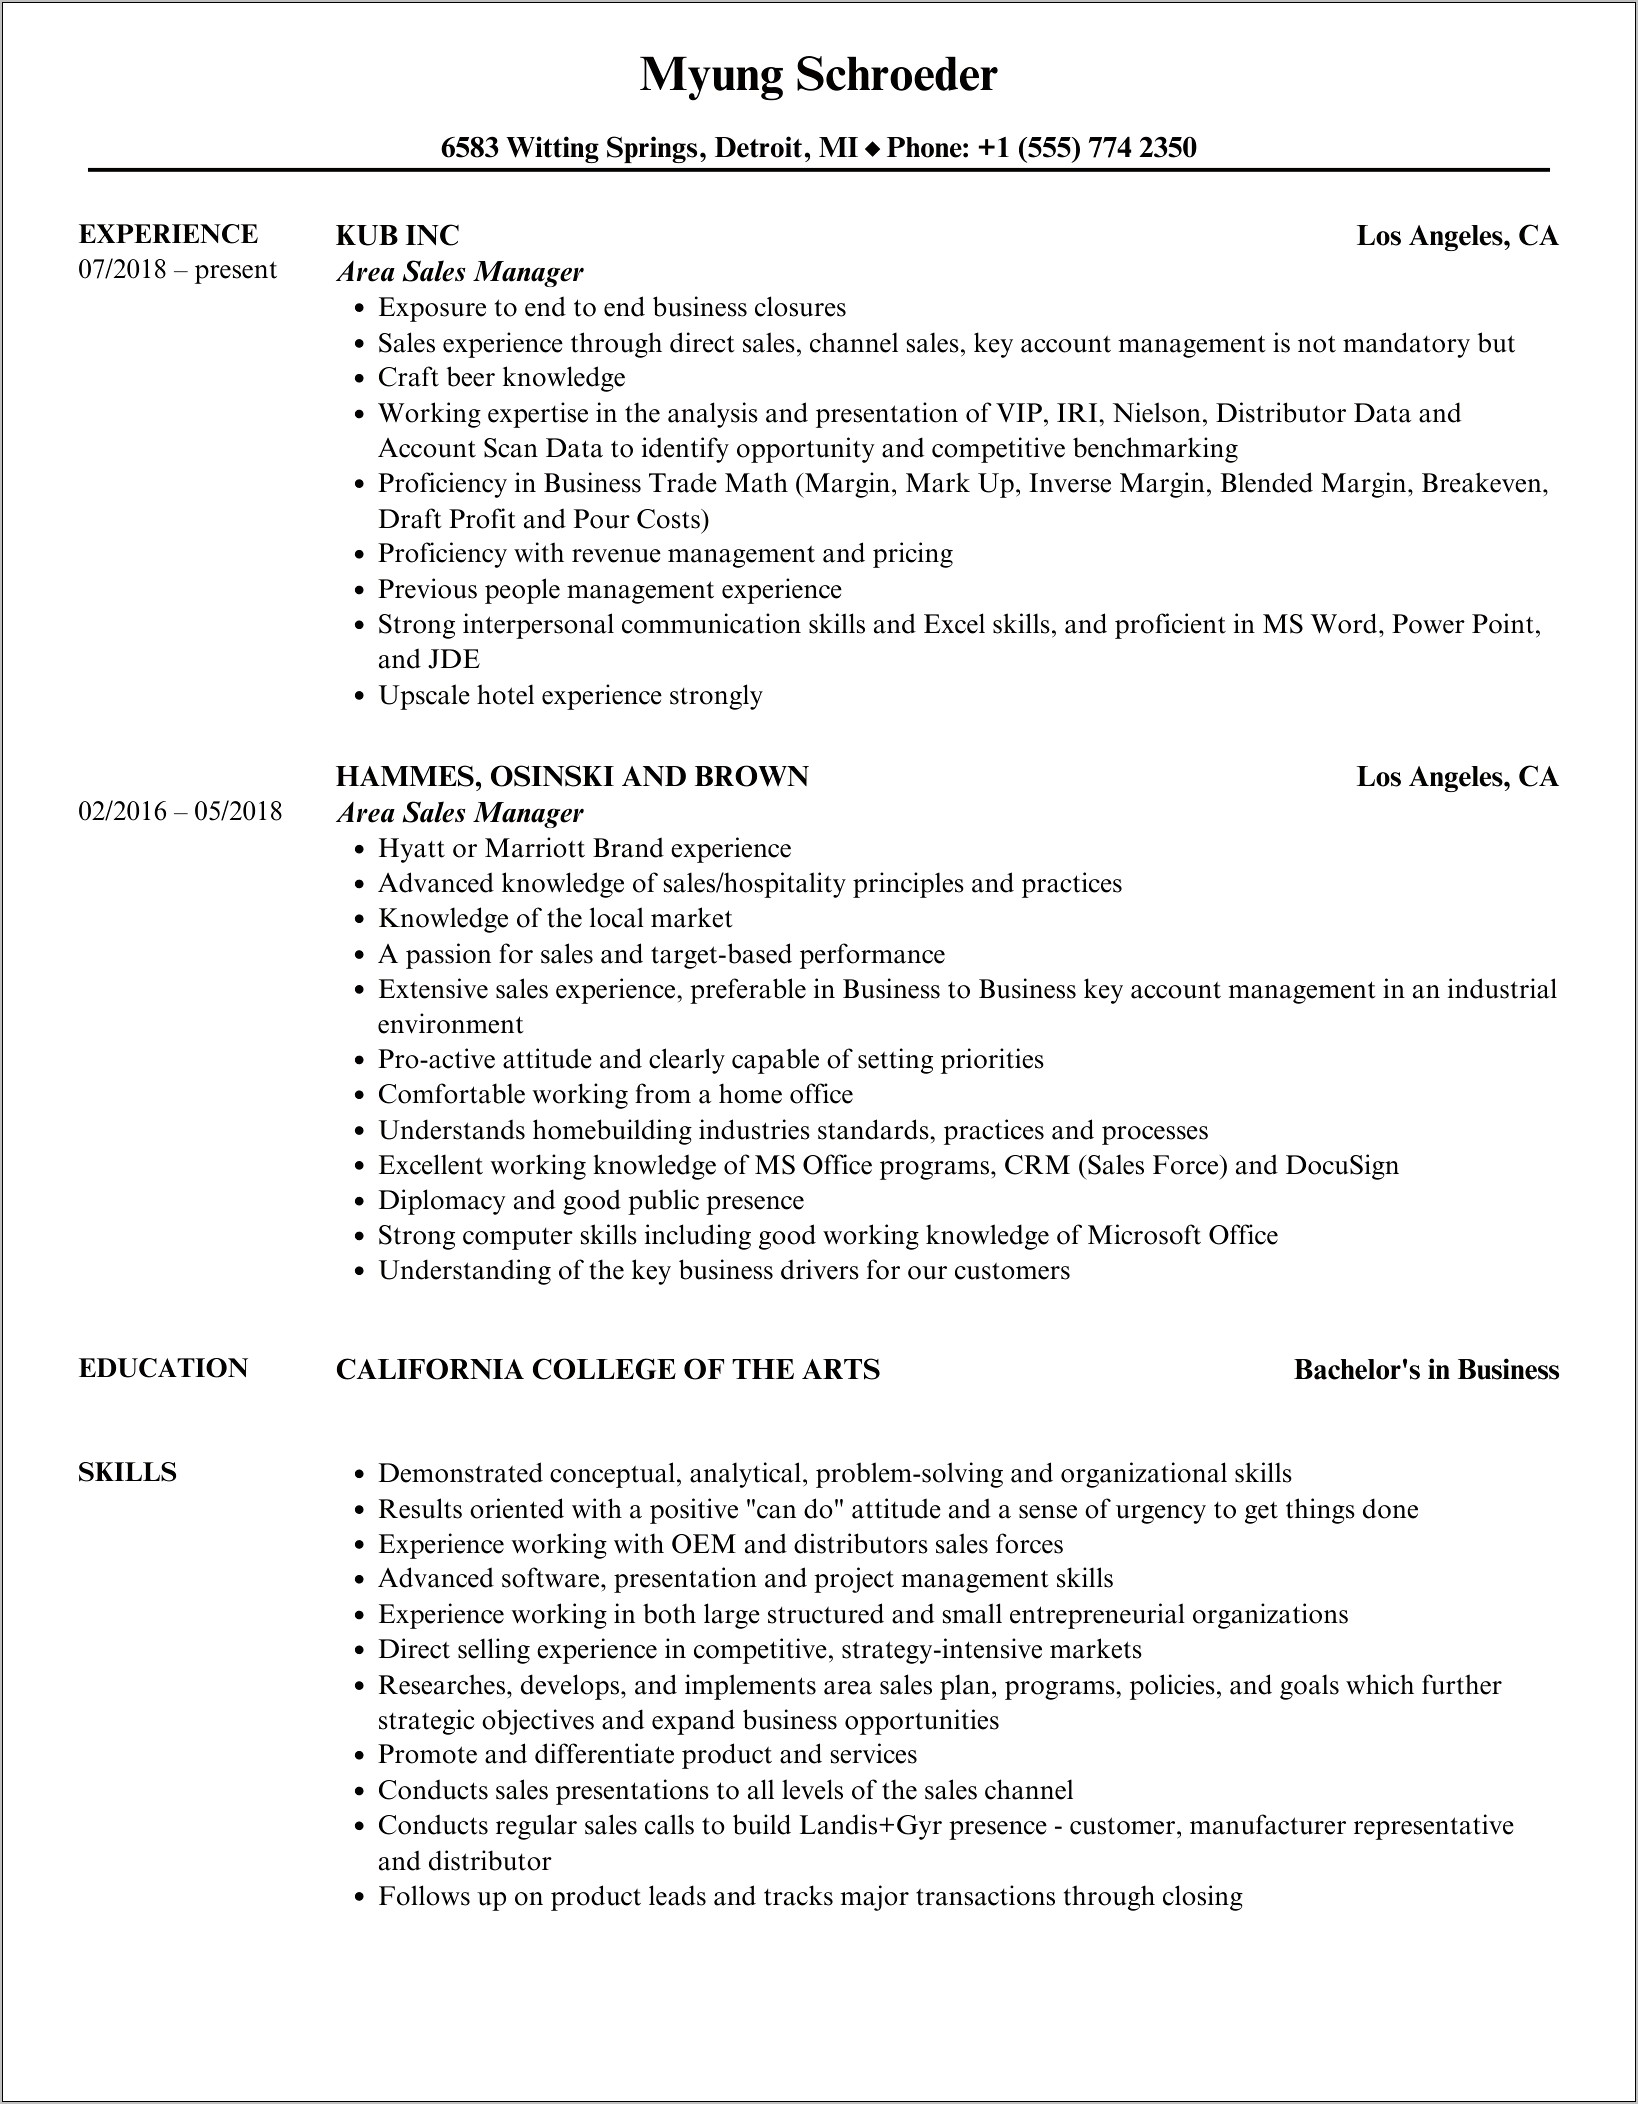 Area Sales Manager Resume Pdf